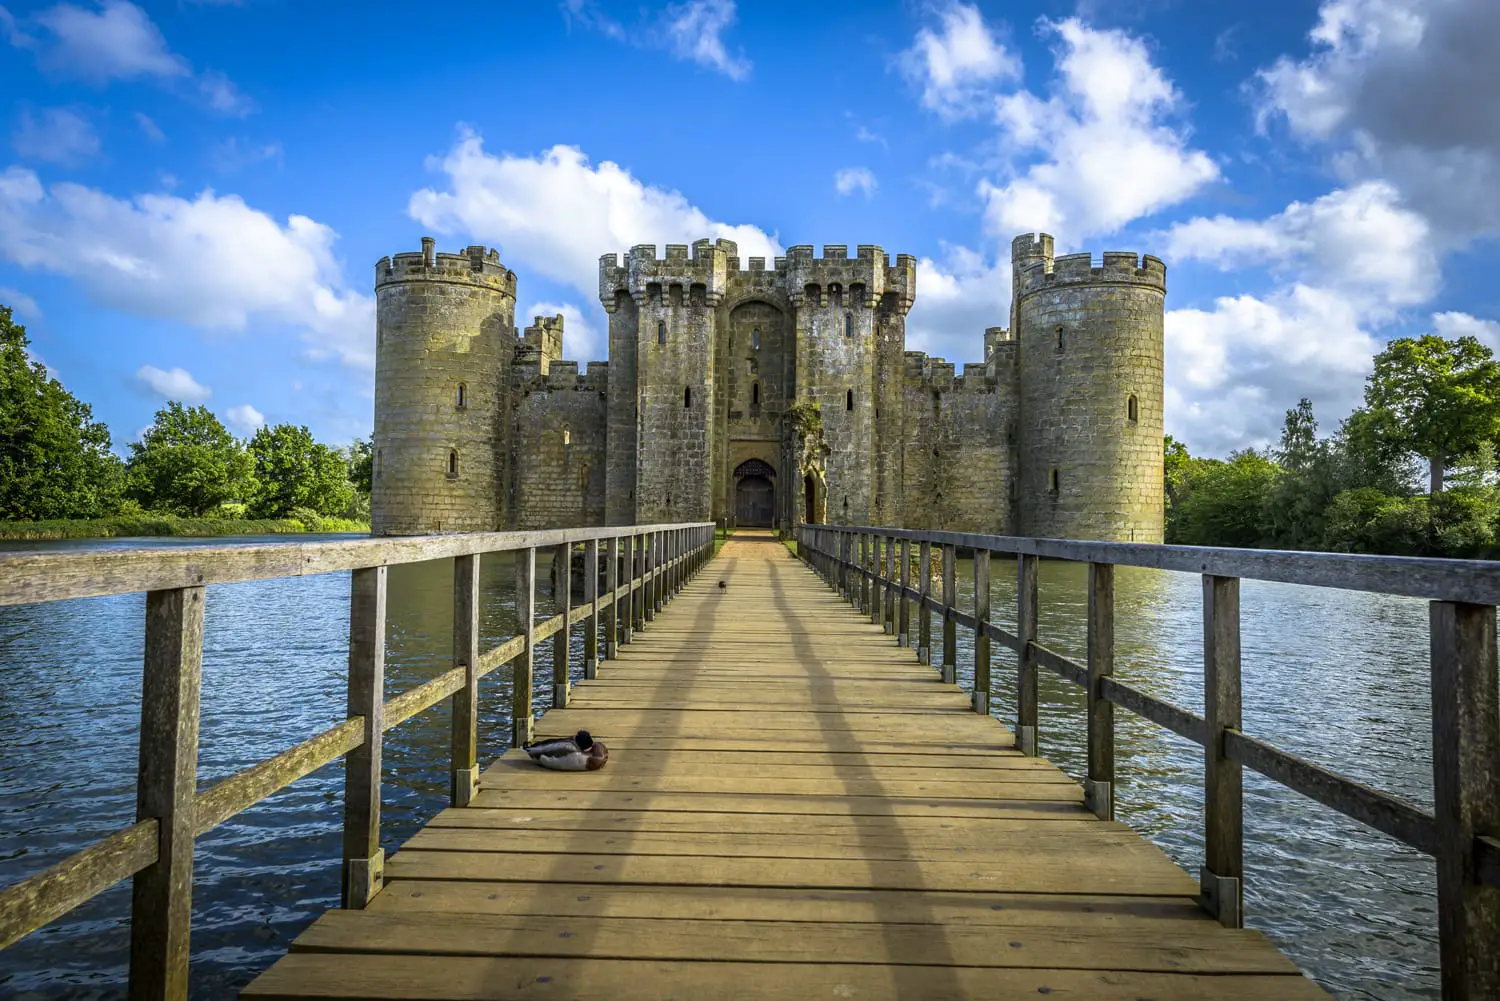 Historic Bodiam Castle and moat in East Sussex, England